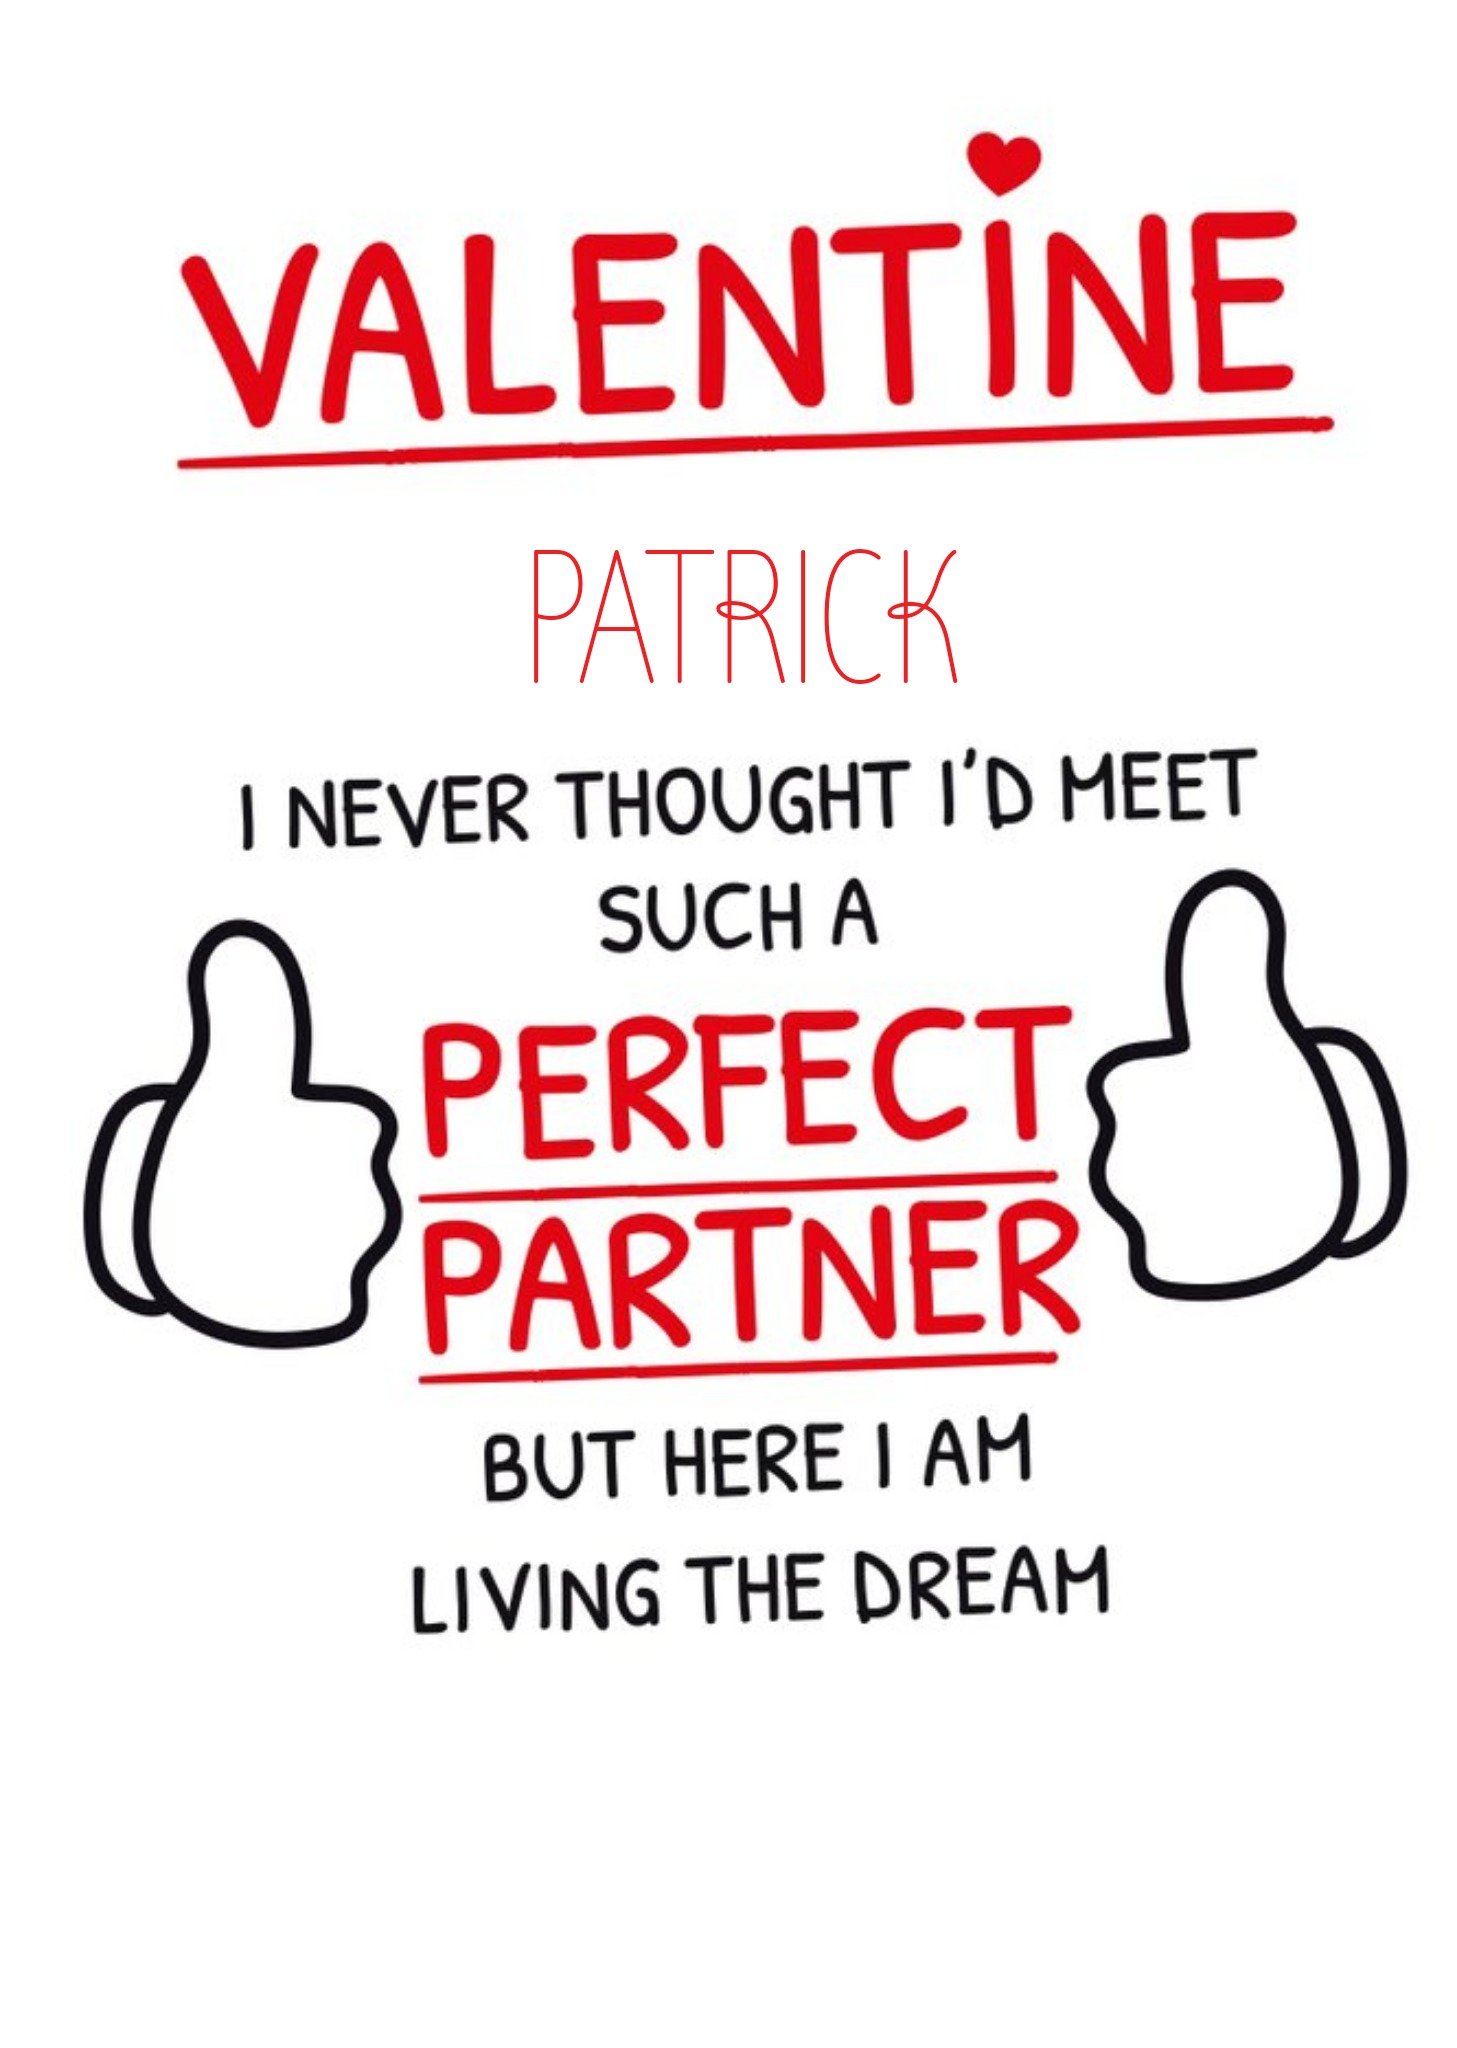 Moonpig Typography With Illustrations Of Two Thumbs Up Perfect Partner Valentine's Day Card, Large